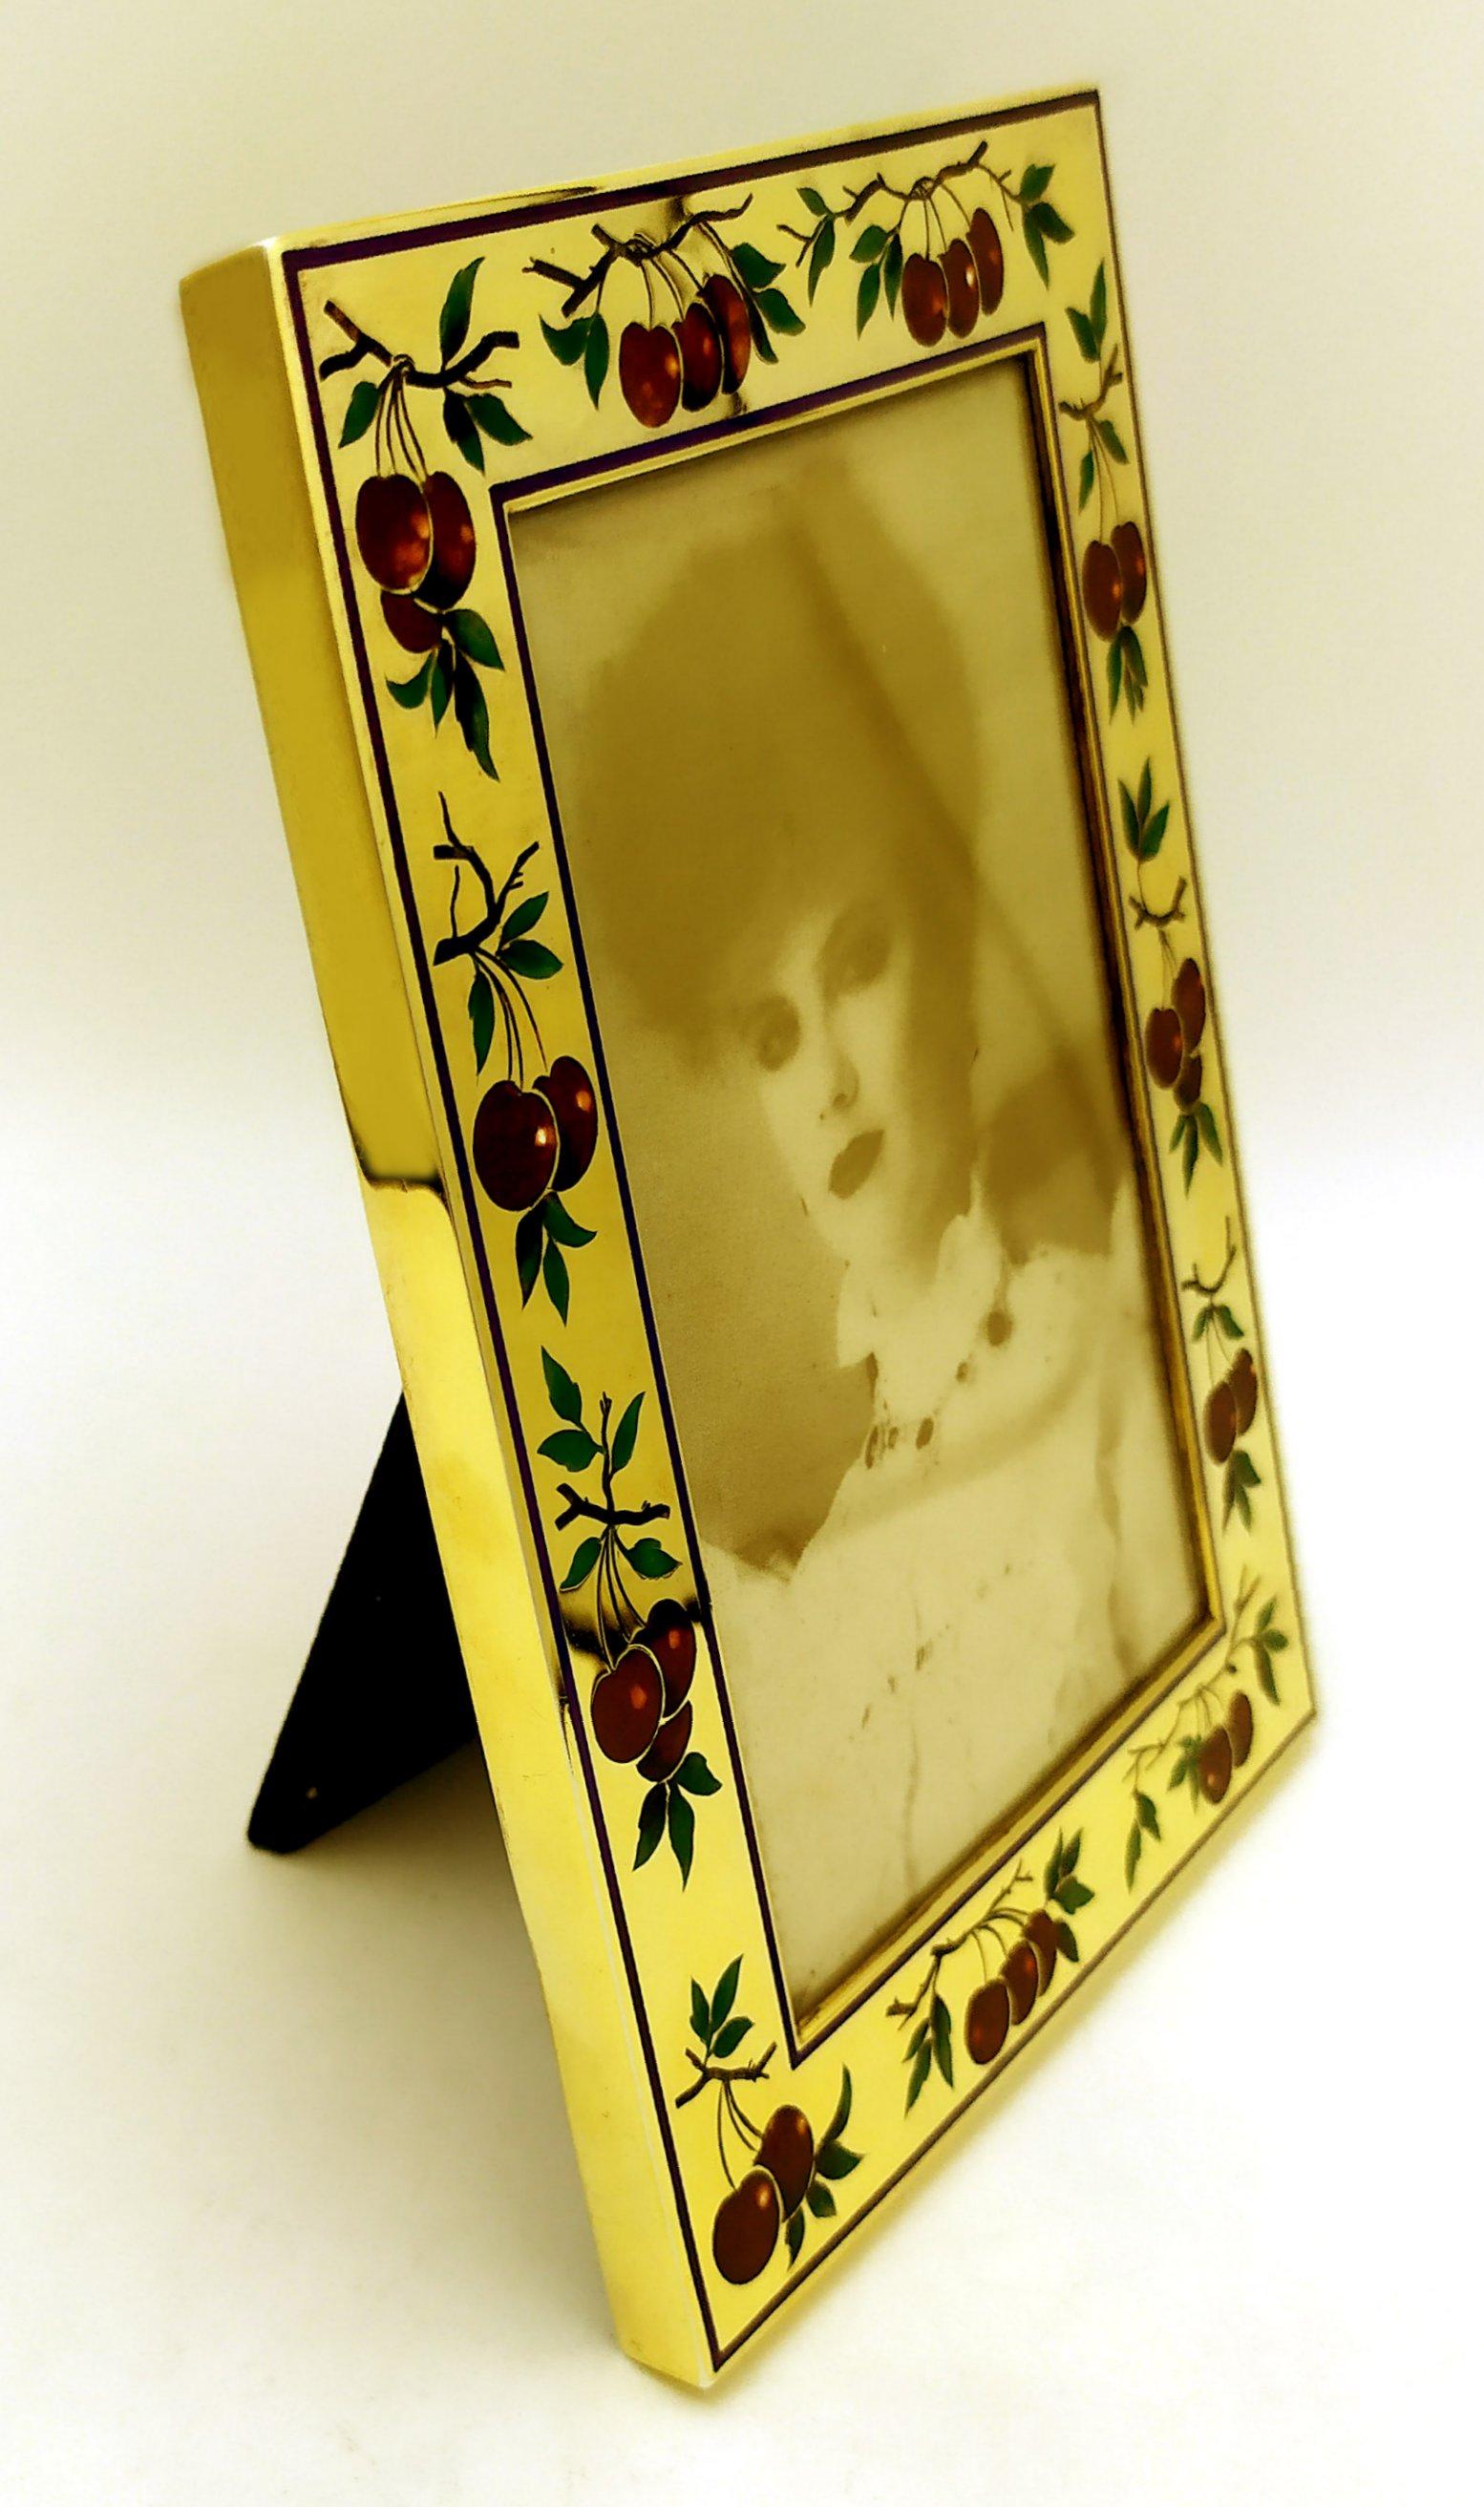 Rectangular photo frame in gold plated 925/1000 sterling silver with fine engraving of fruit (cherries) fire enamelled with polychrome colours, contemporary style. Ground glass and alcantara back panel. External measurements cm. 13 x 17, internal